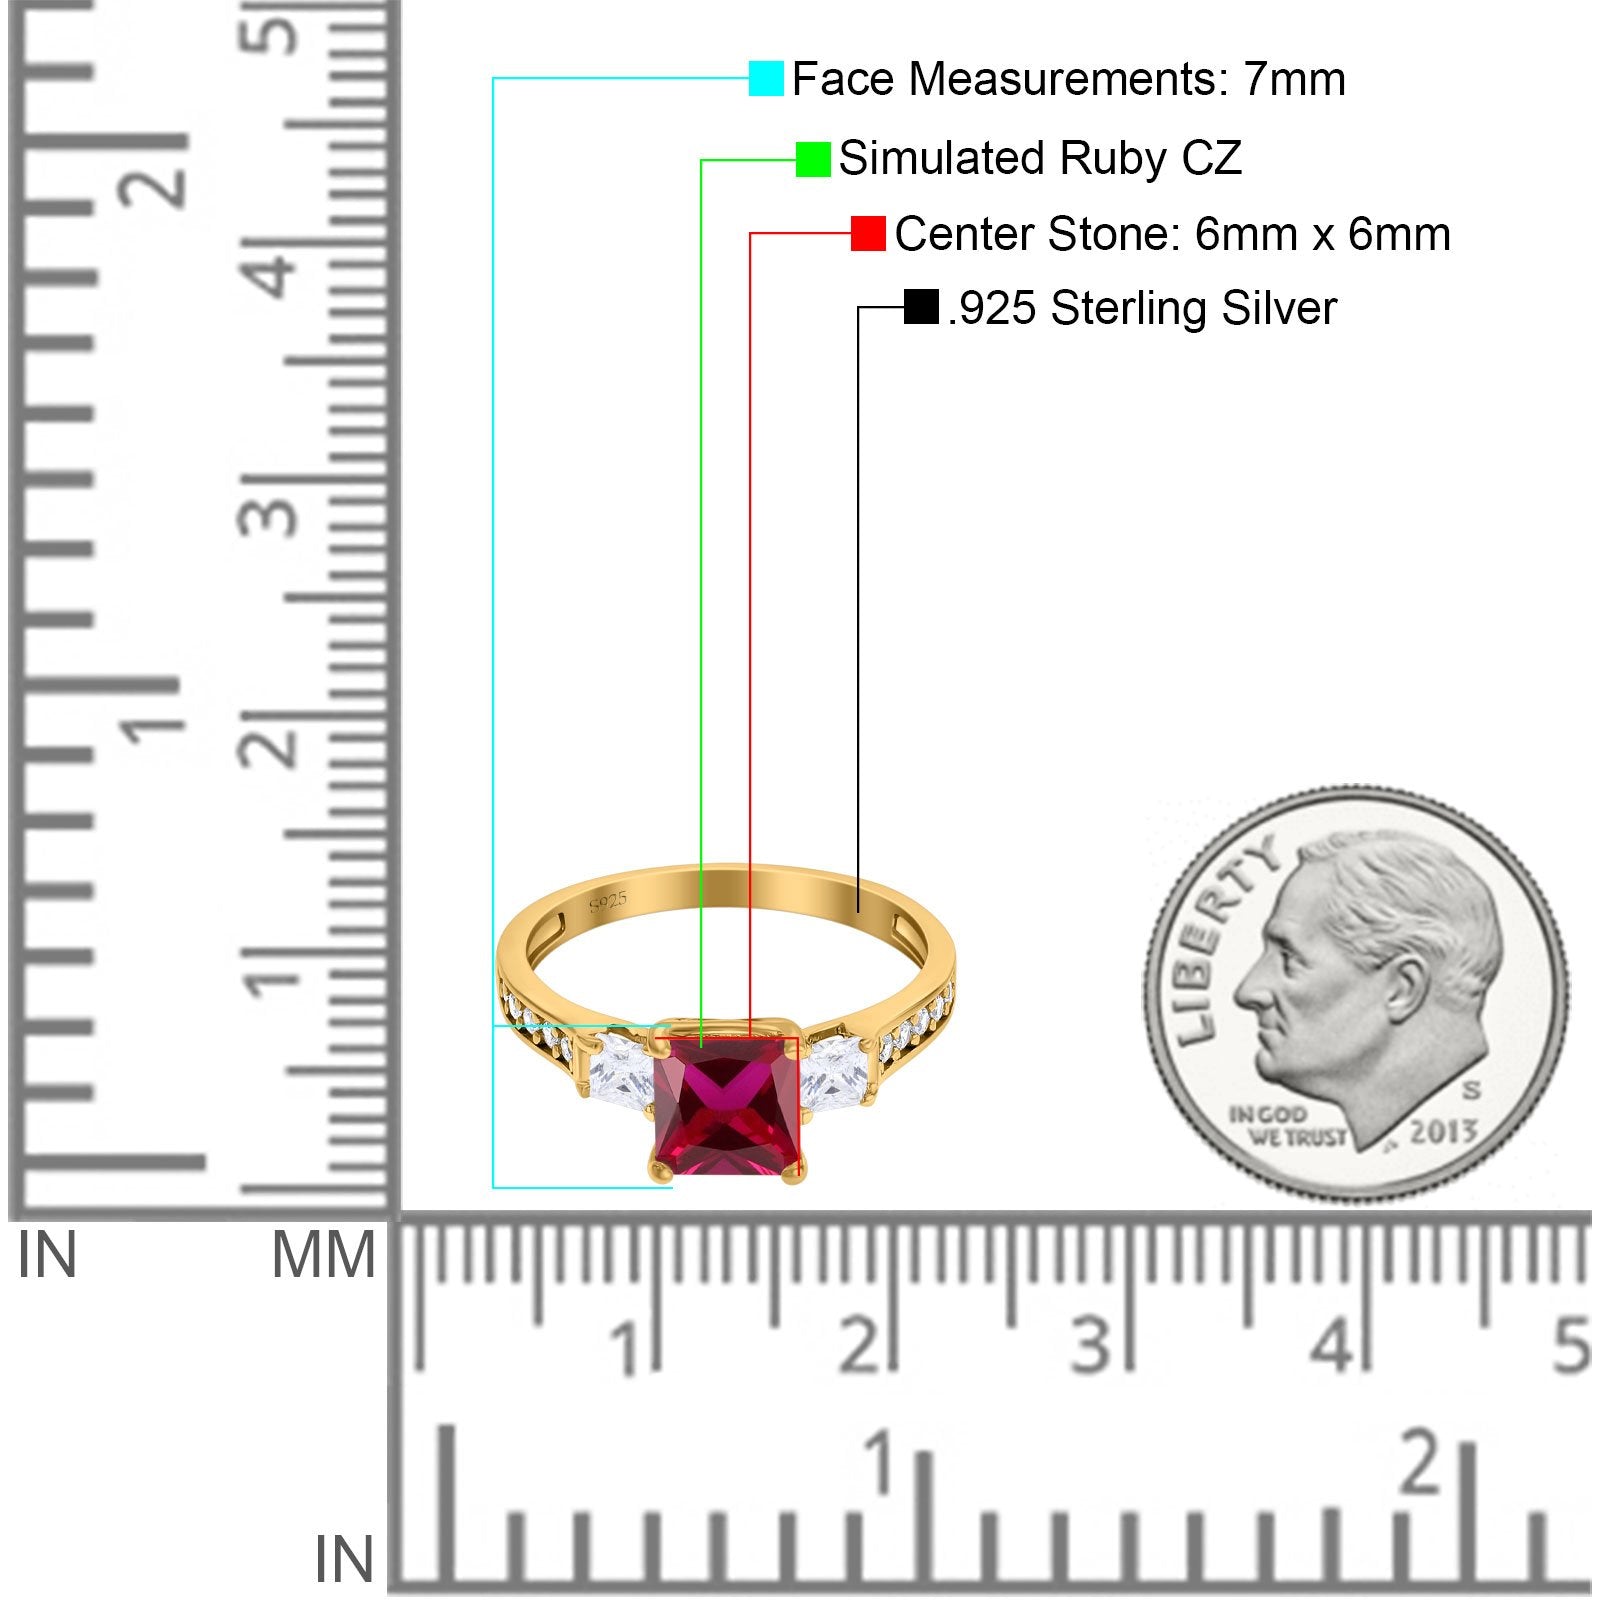 Princess Cut Art Deco Wedding Engagement Bridal Ring Round Simulated Cubic Zirconia 925 Sterling Silver